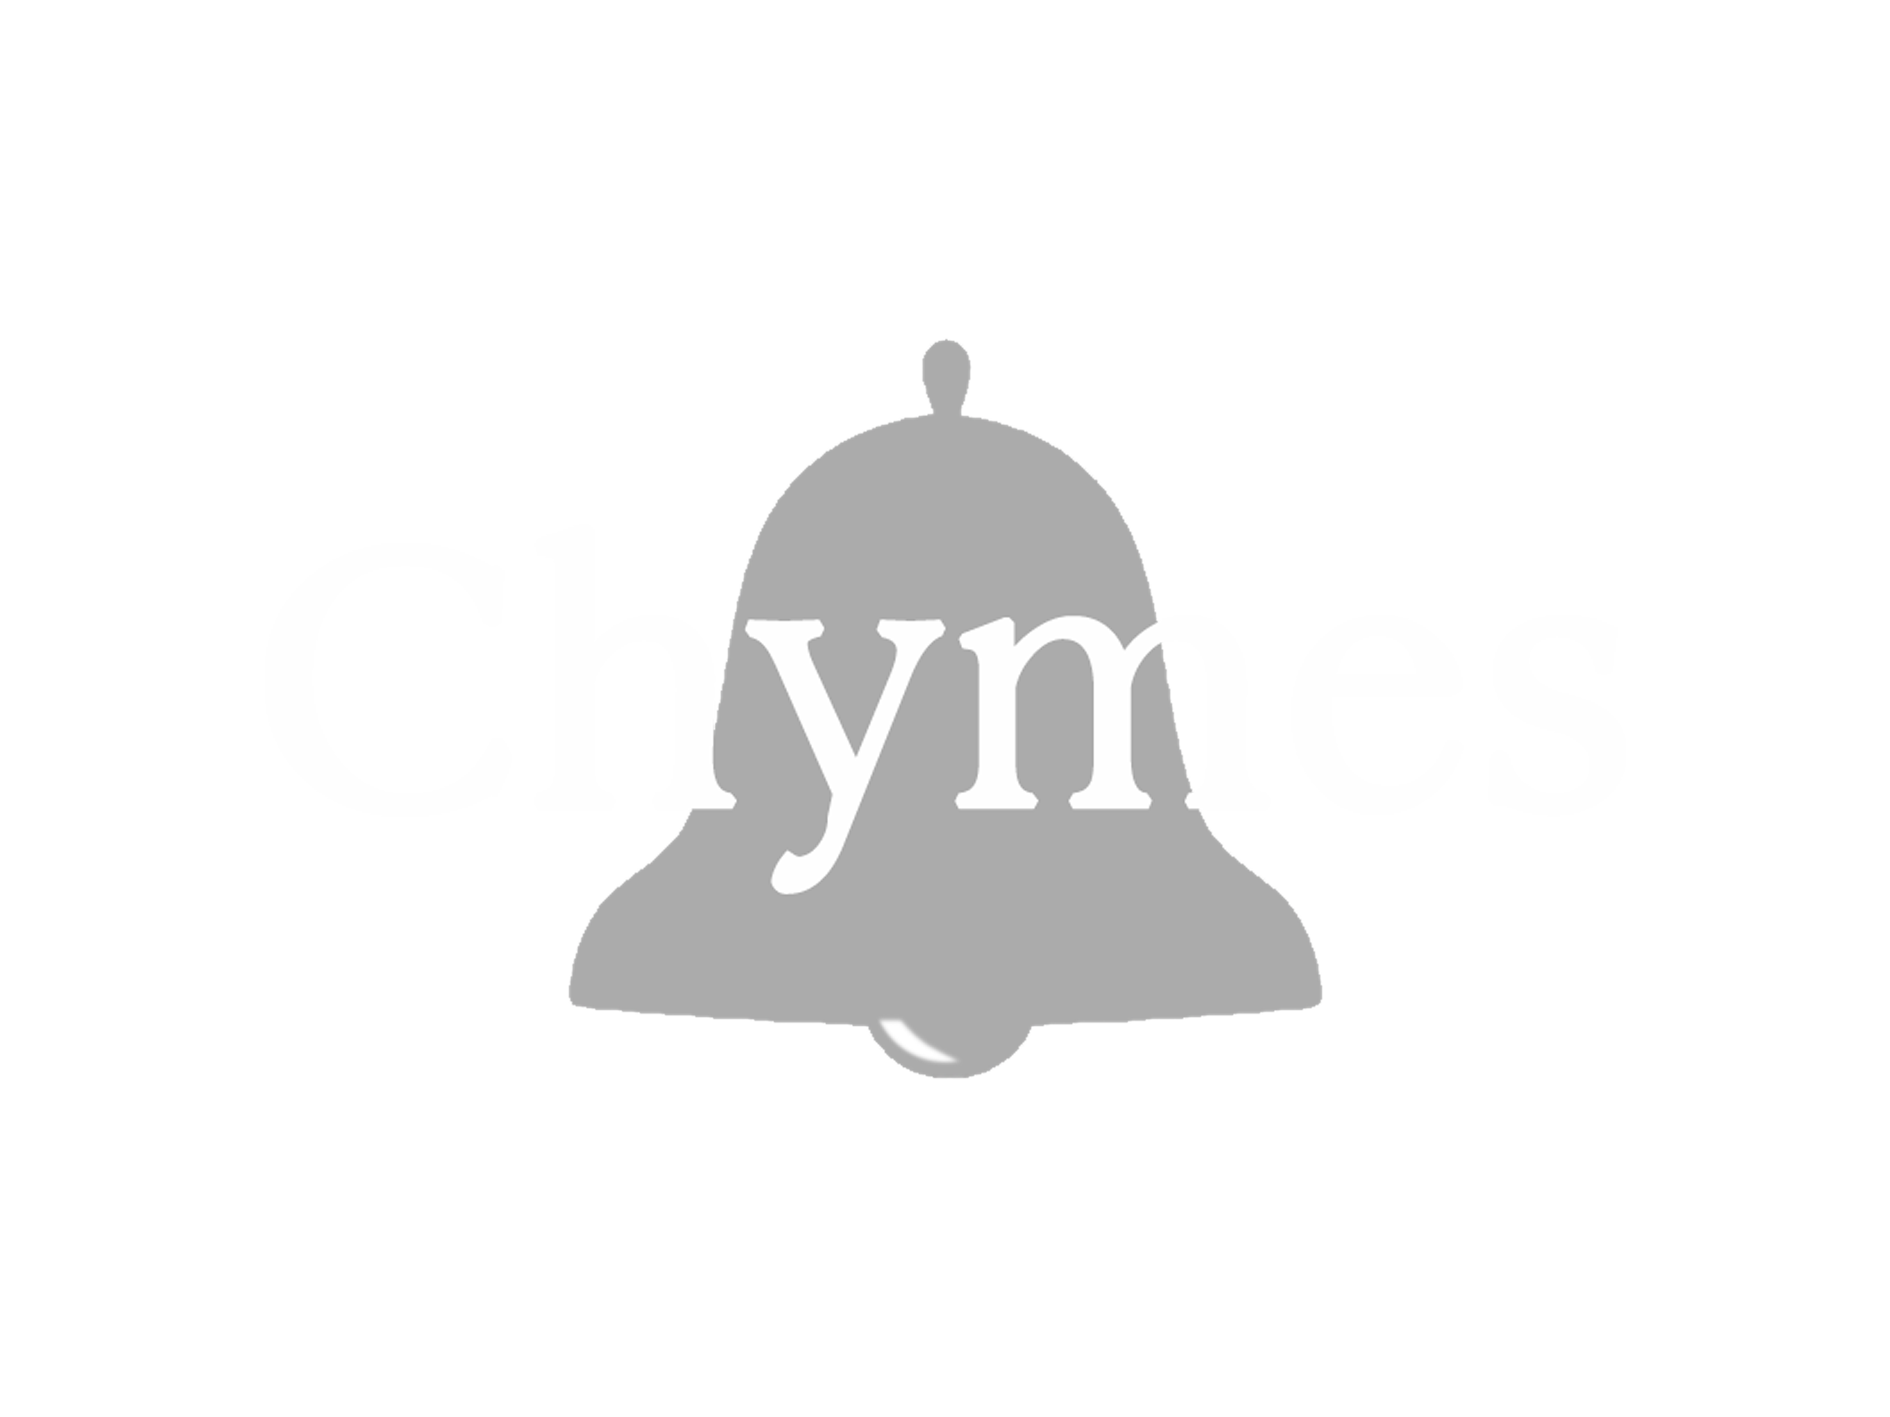 Chymes